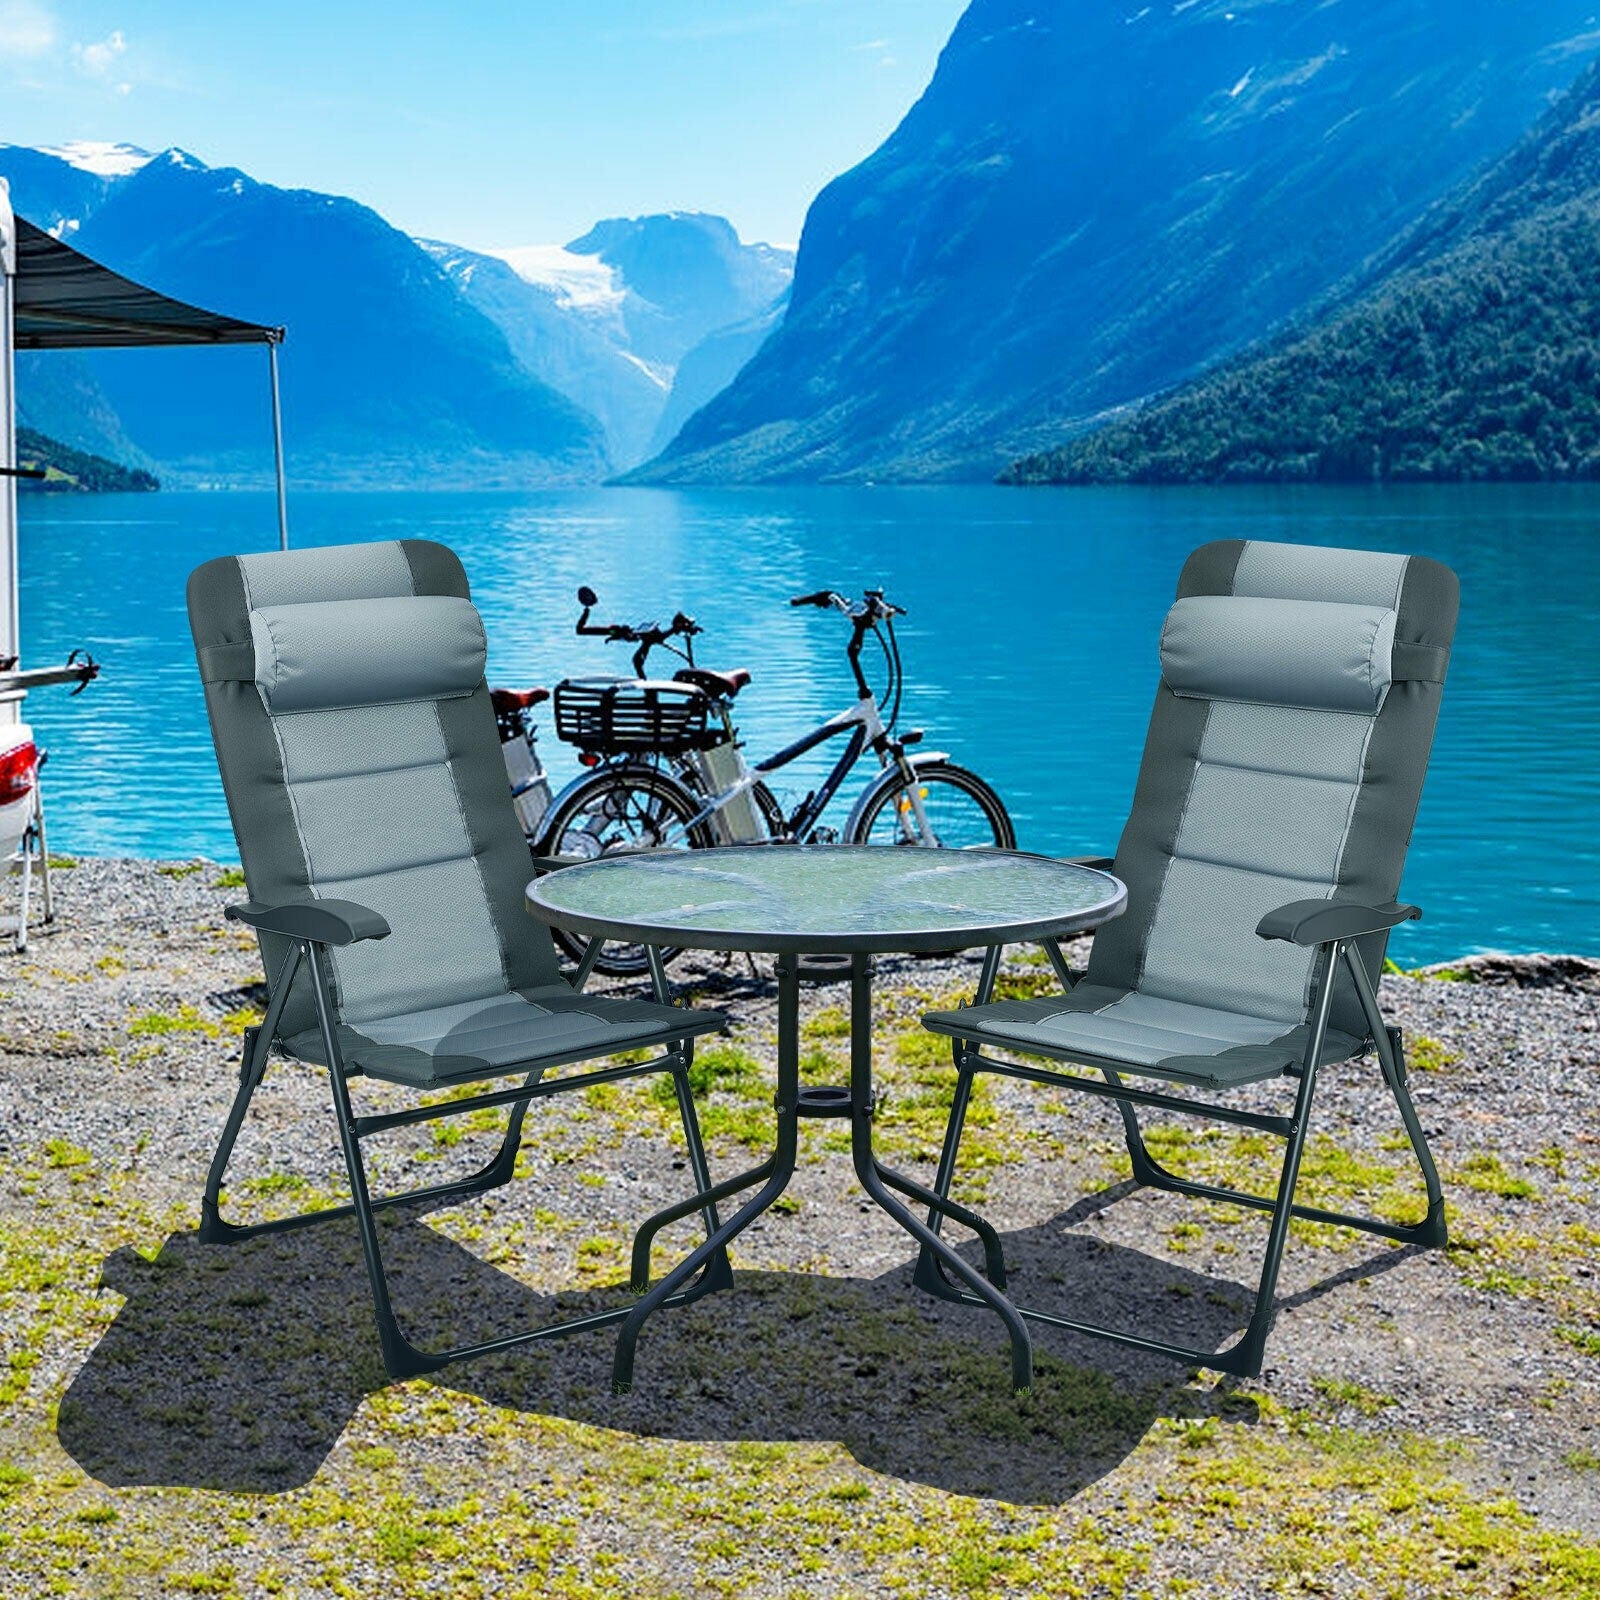 Giantex Set of 2 Patio Dining Chairs with Ottoman, Folding Recliner Chairs (Grey)